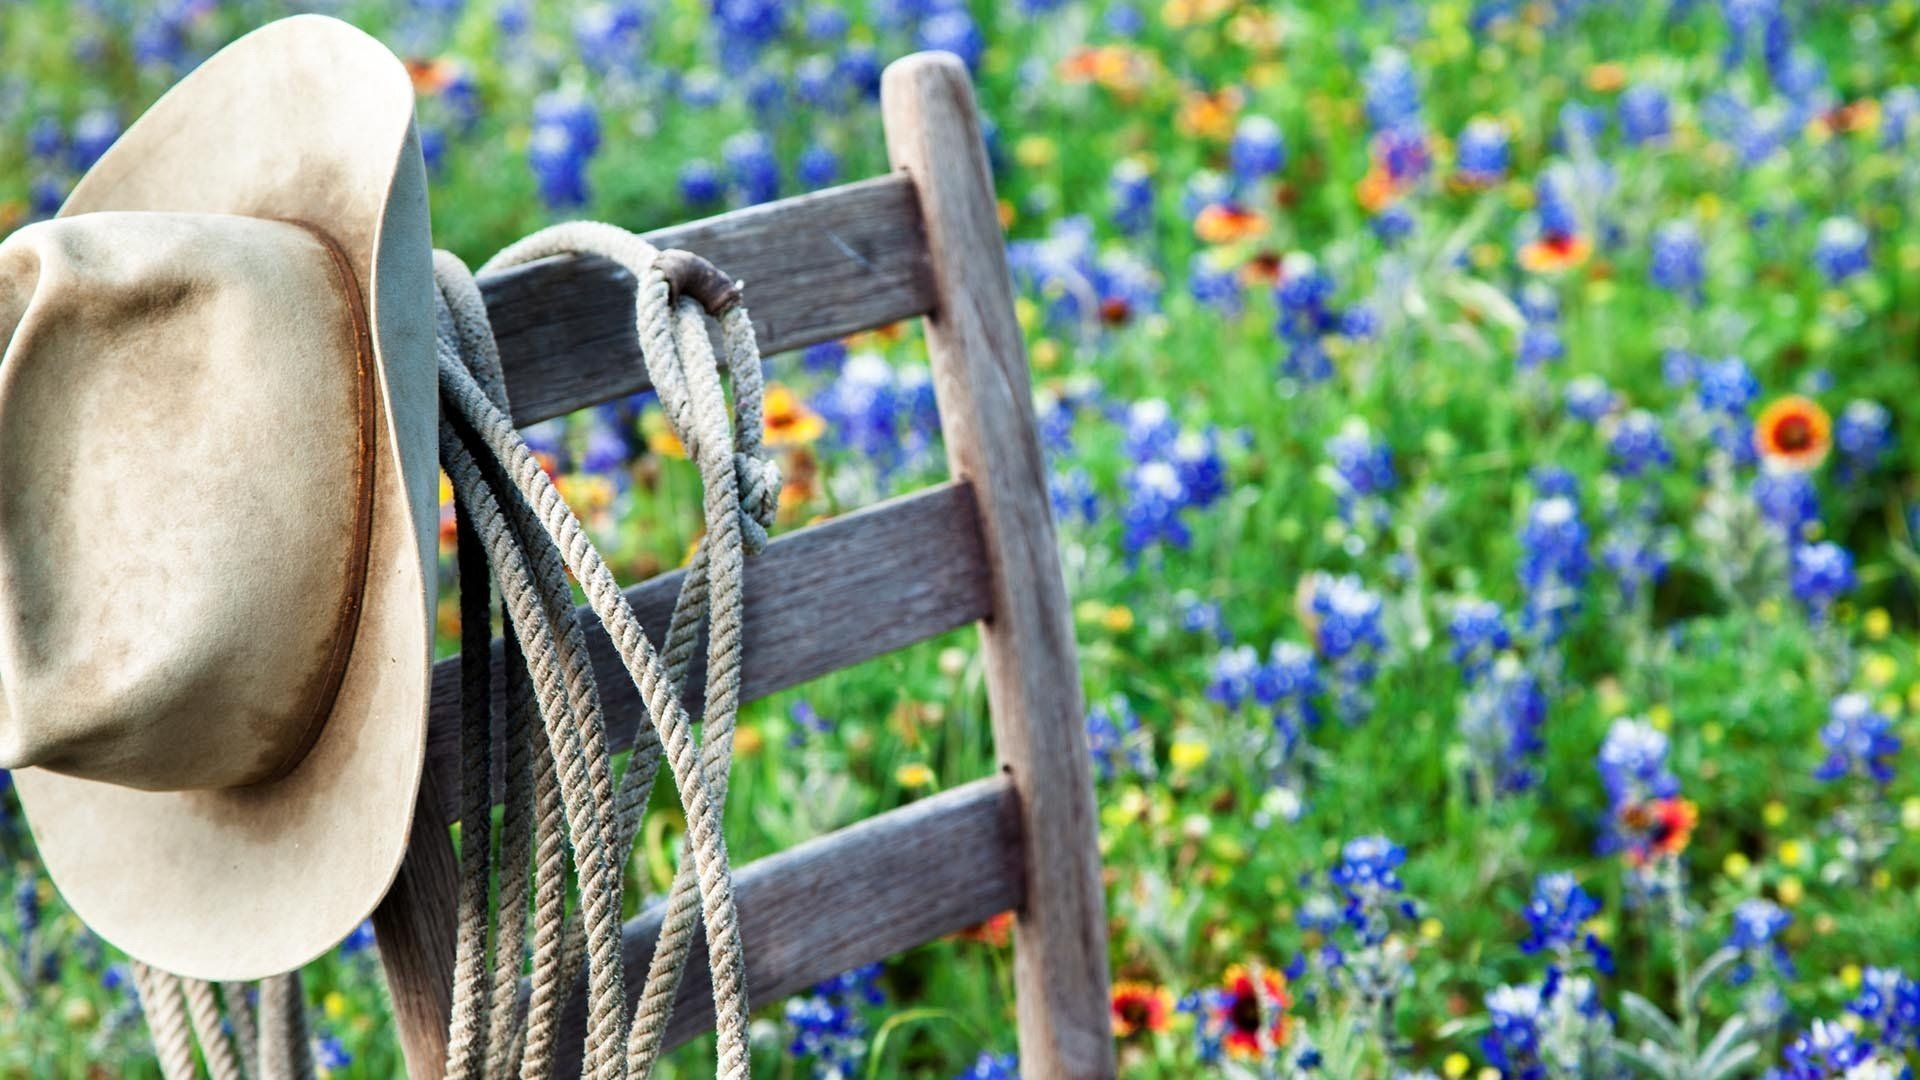 wooden chair and rope in front of flowers